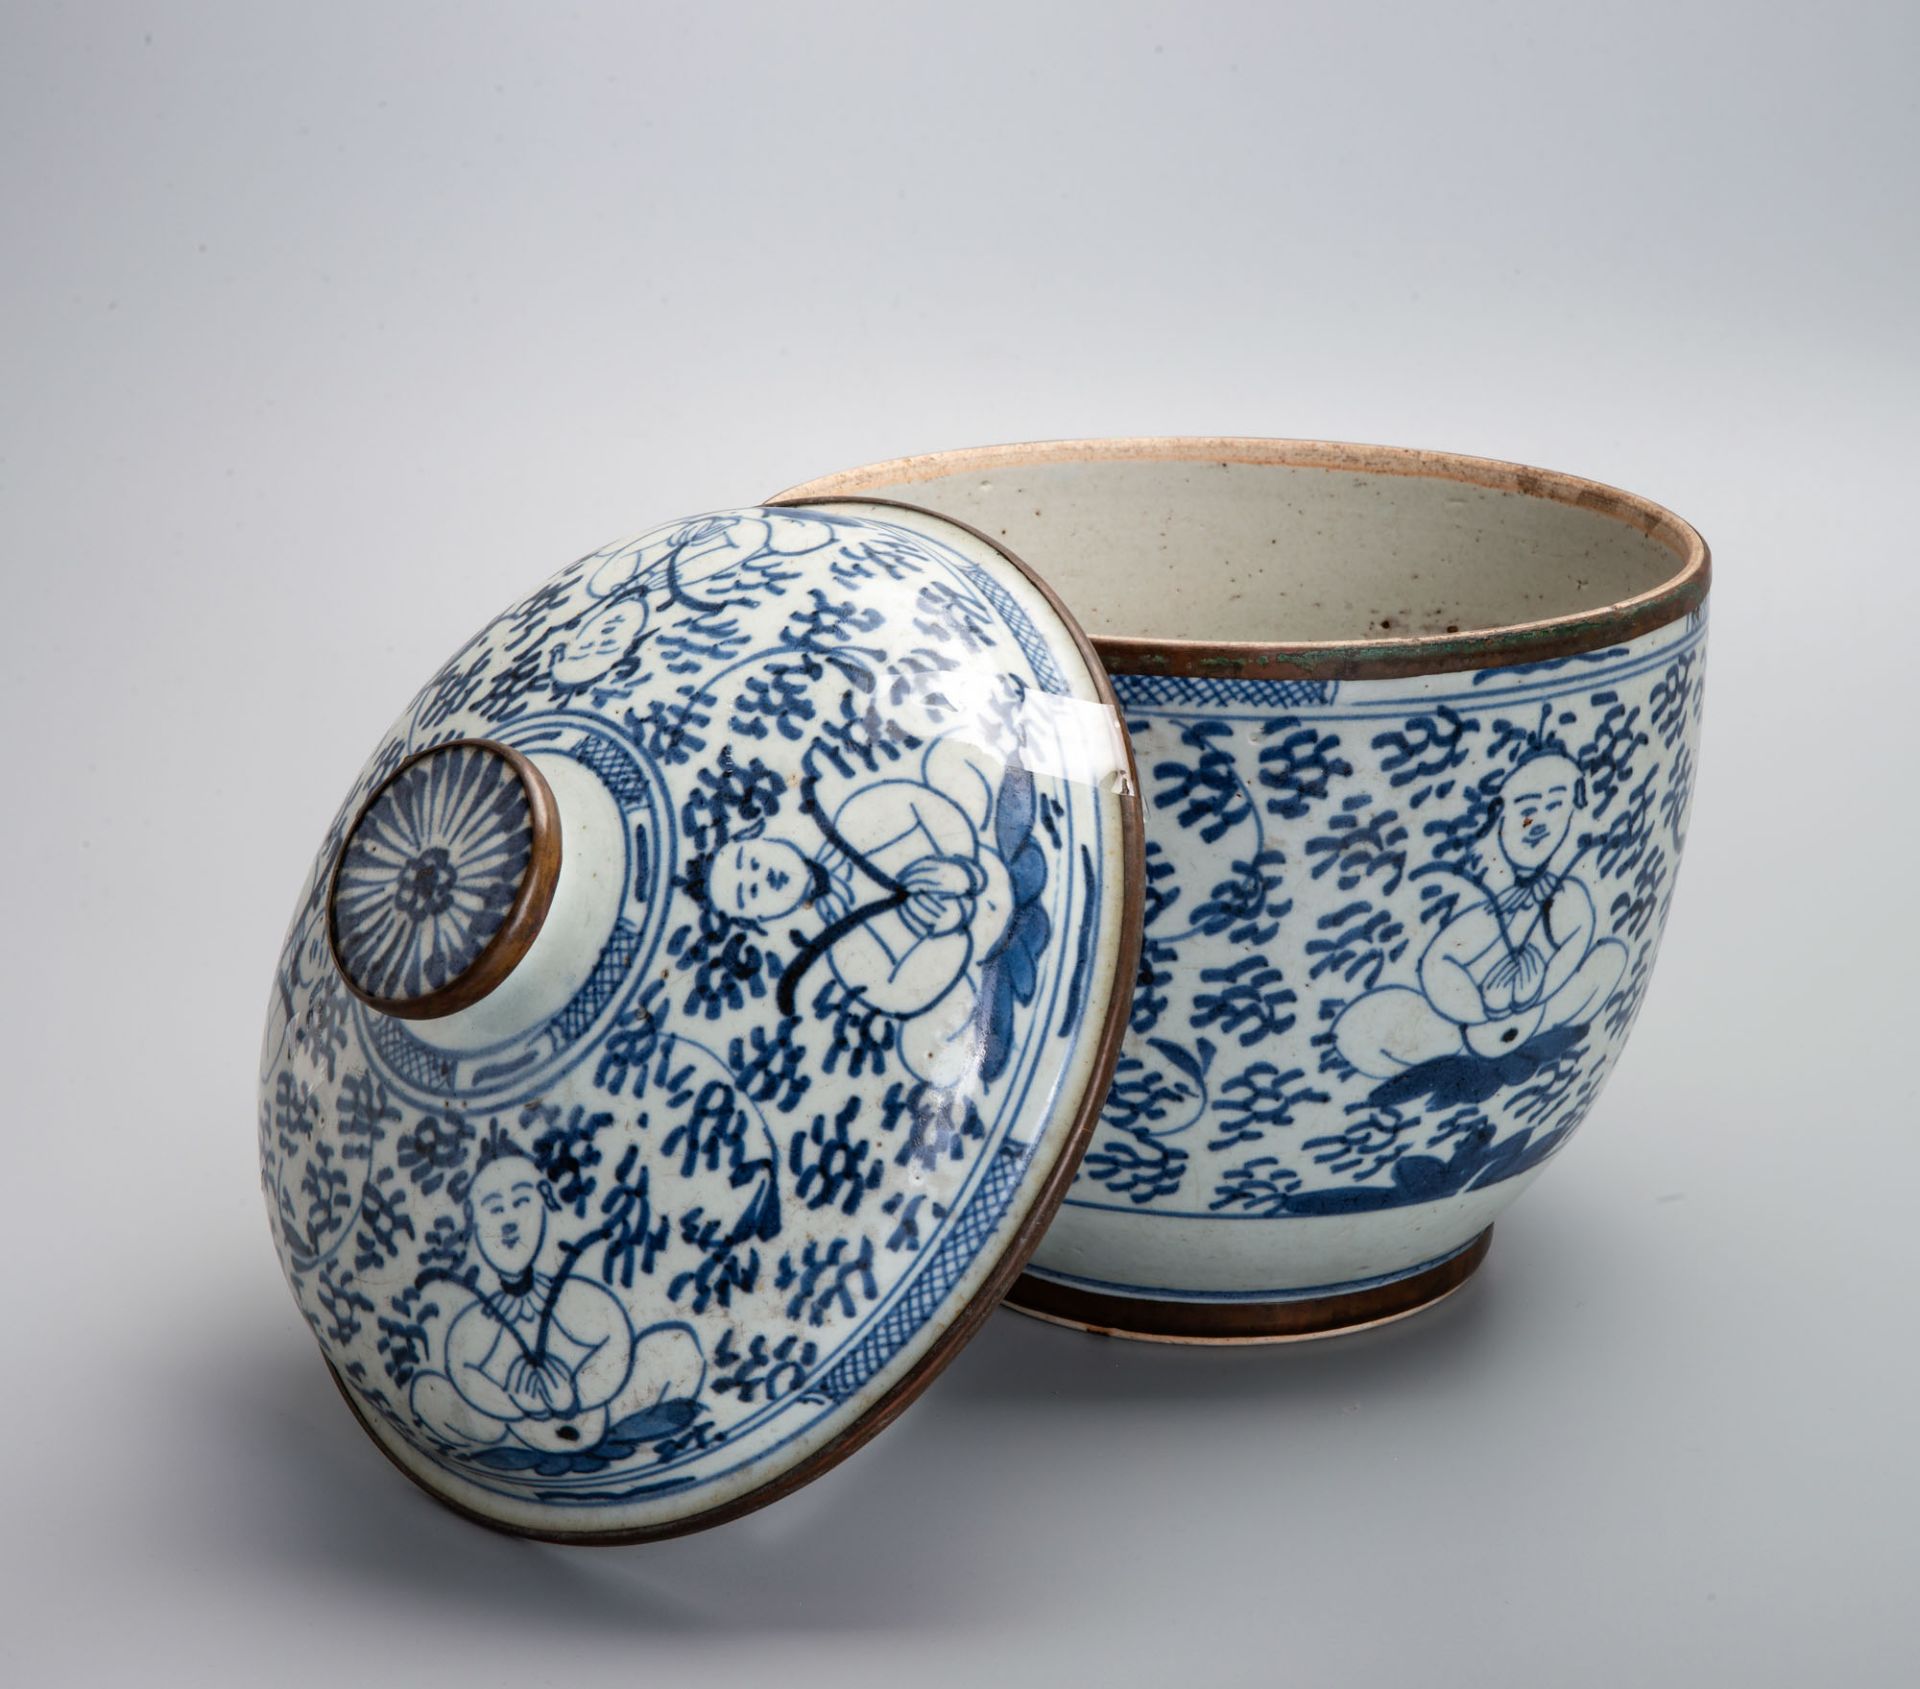 A Rare Blue and White Porcelain Lidded Jar, China, Qing Dynasty, 18th century - Image 3 of 5